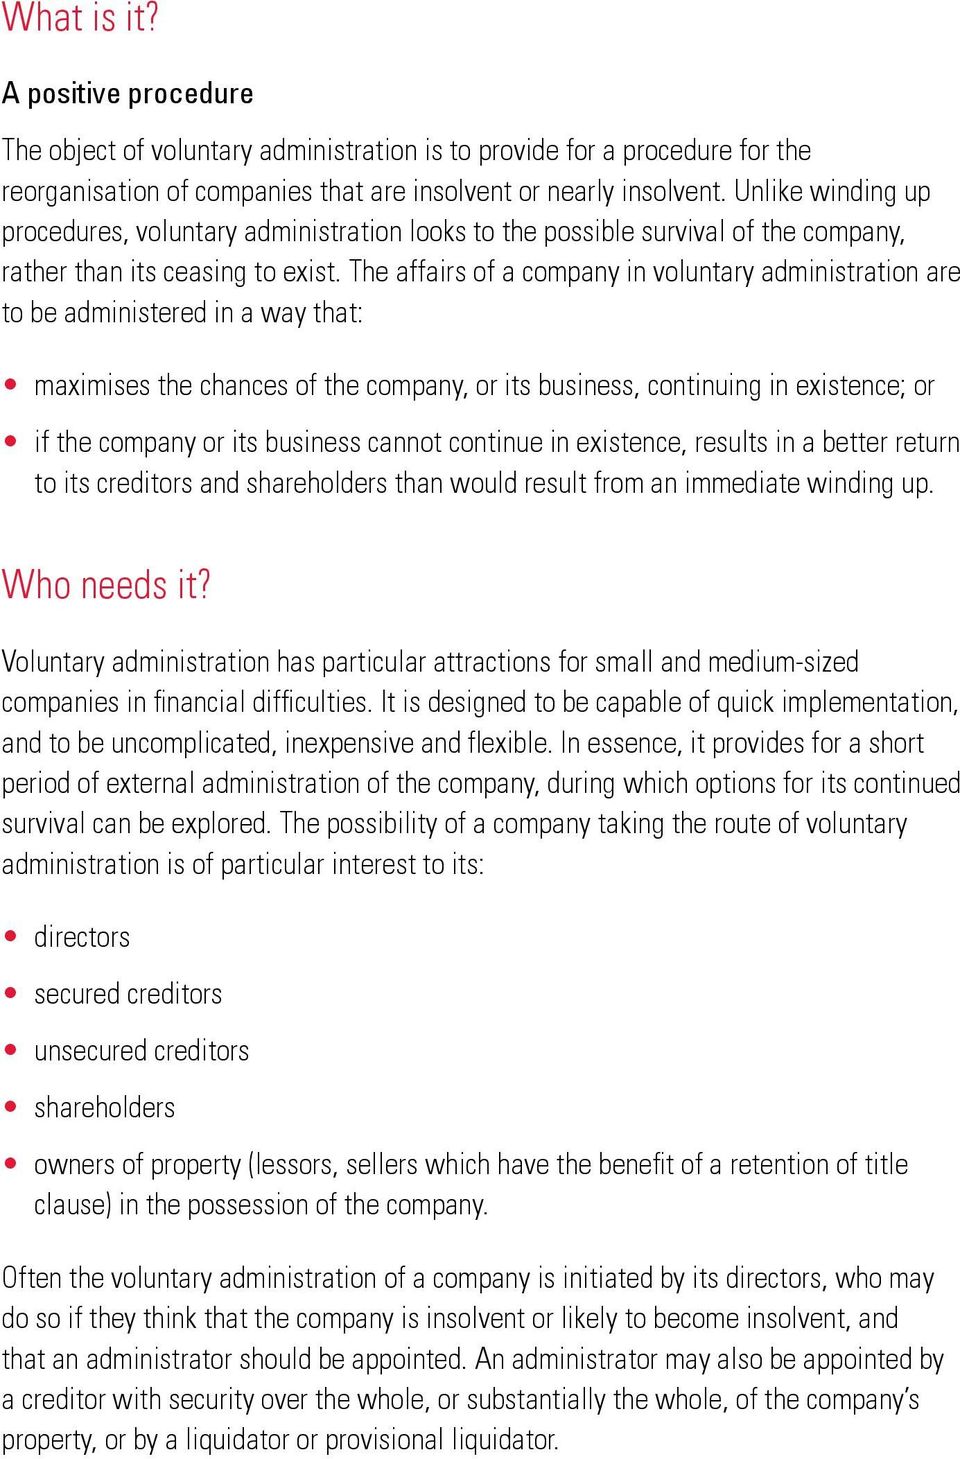 The affairs of a company in voluntary administration are to be administered in a way that: maximises the chances of the company, or its business, continuing in existence; or if the company or its